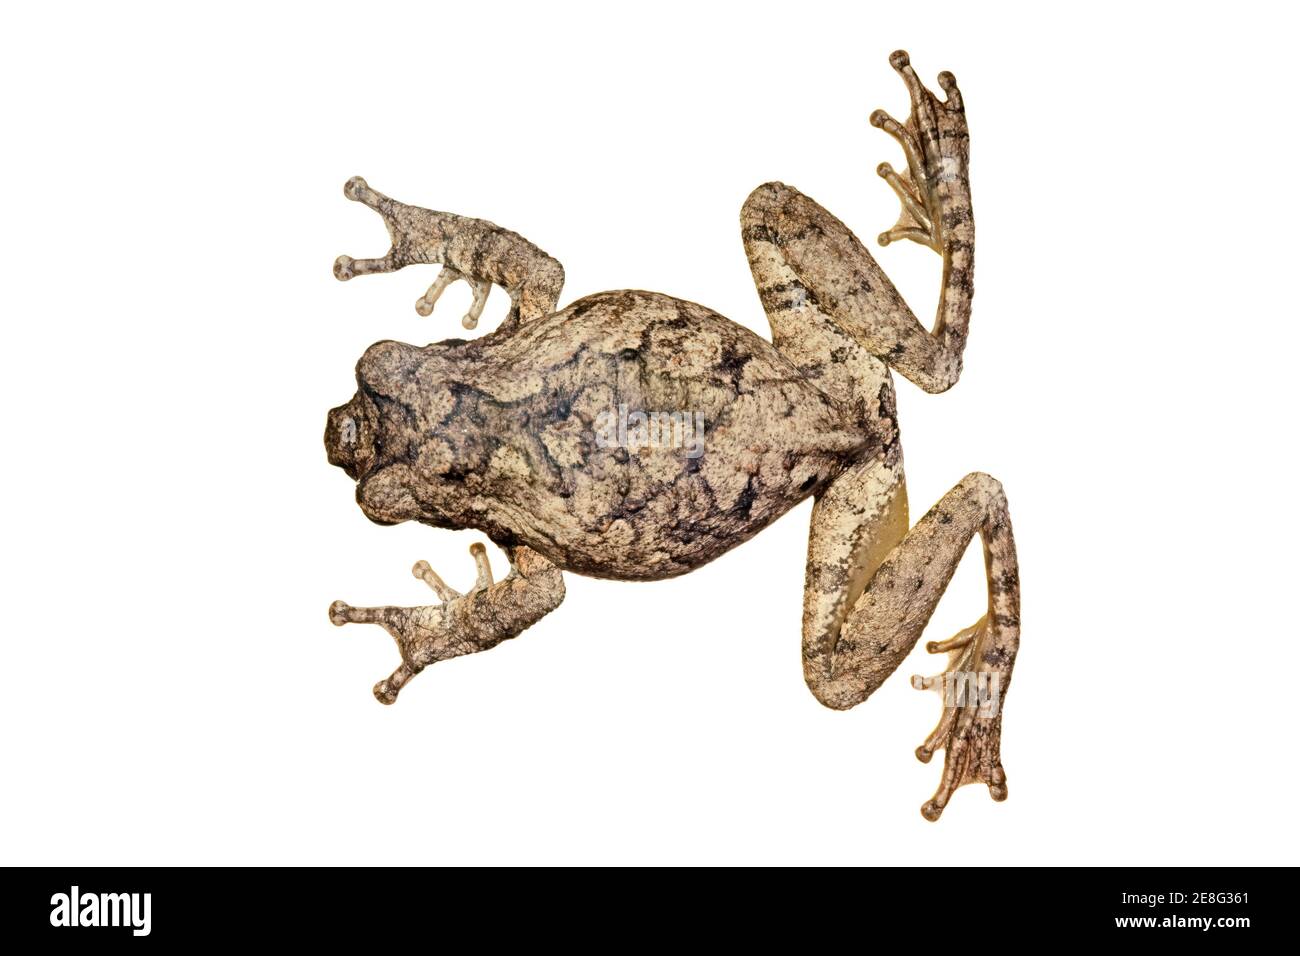 Top view of an African foam nest frog (Chiromantis xerampelina) isolated on white Stock Photo